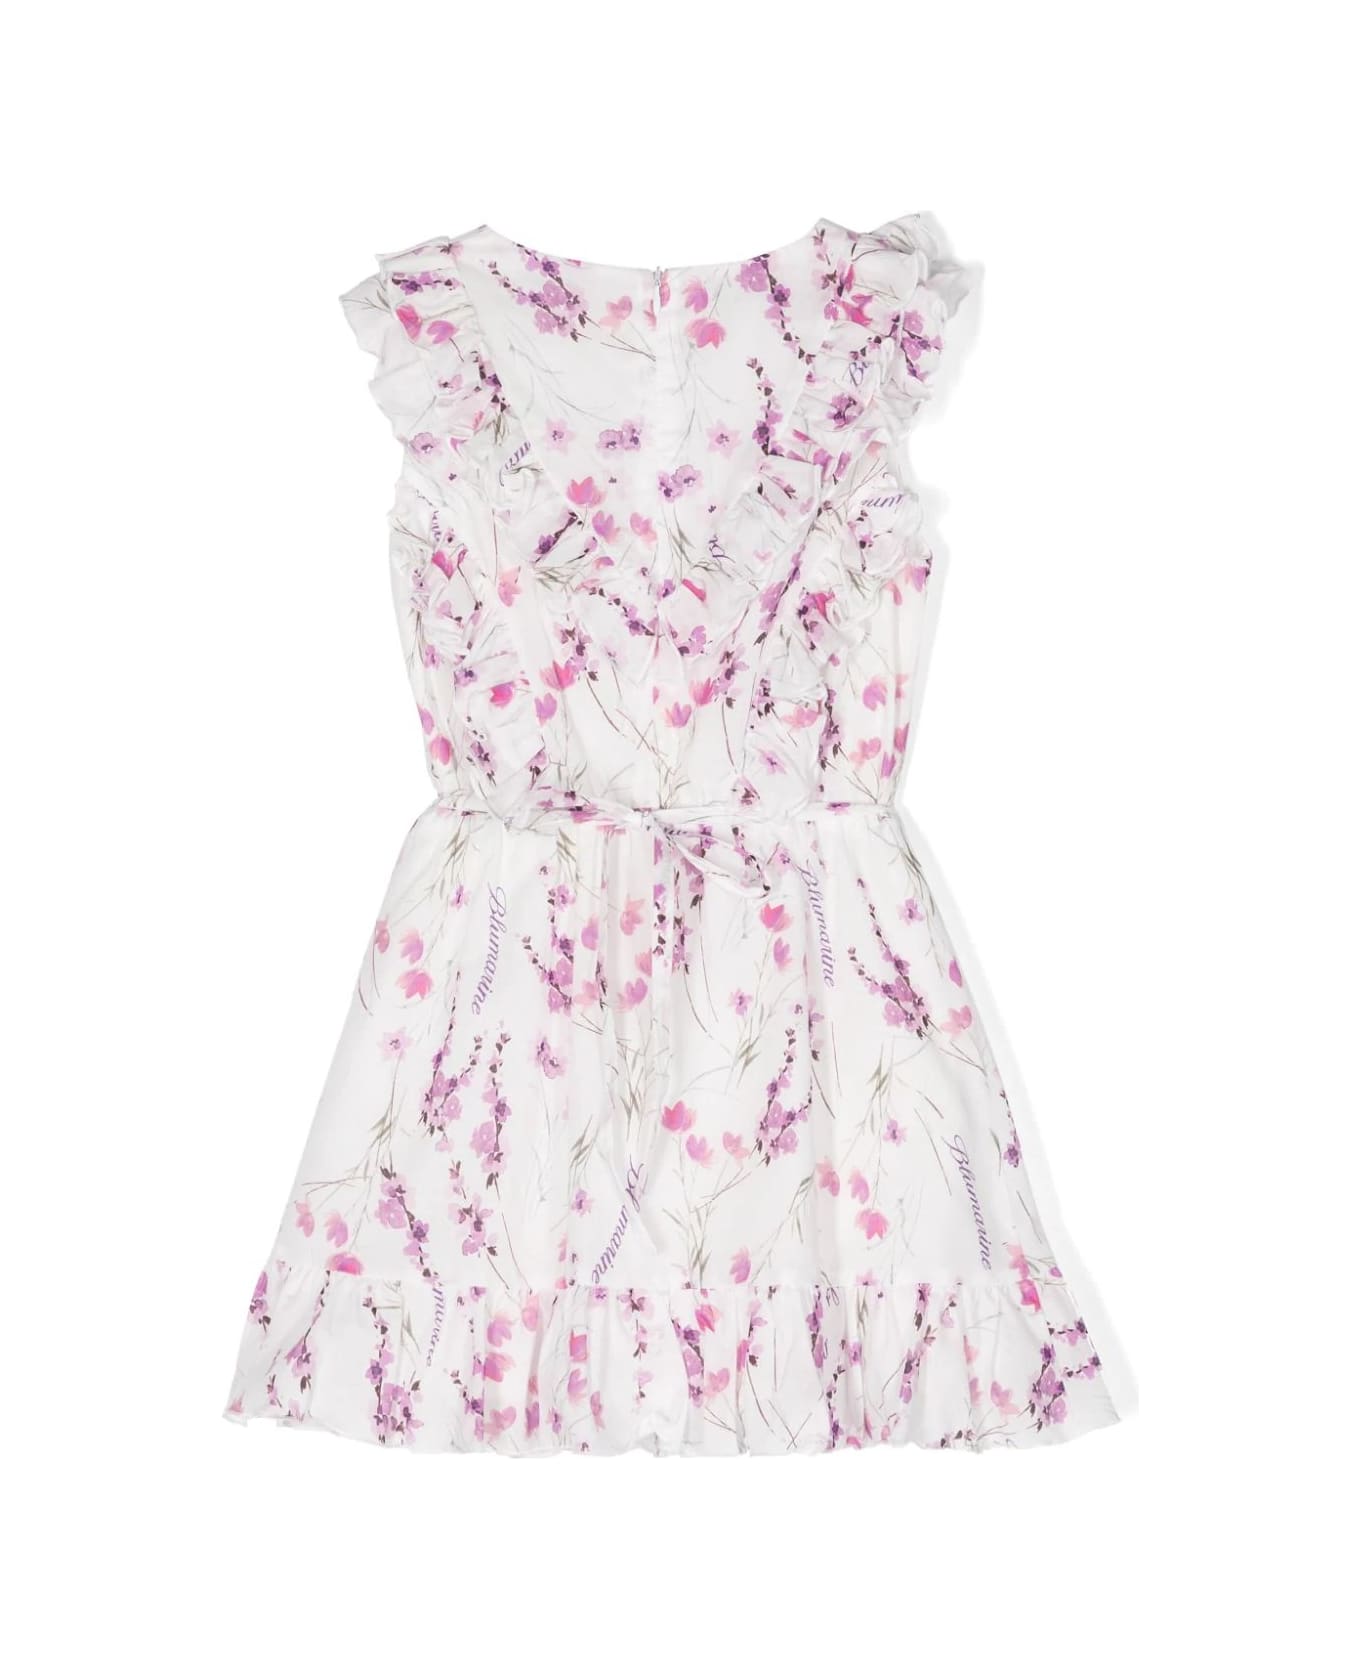 Miss Blumarine White Dress With Ruffles And Floral Print - White ワンピース＆ドレス